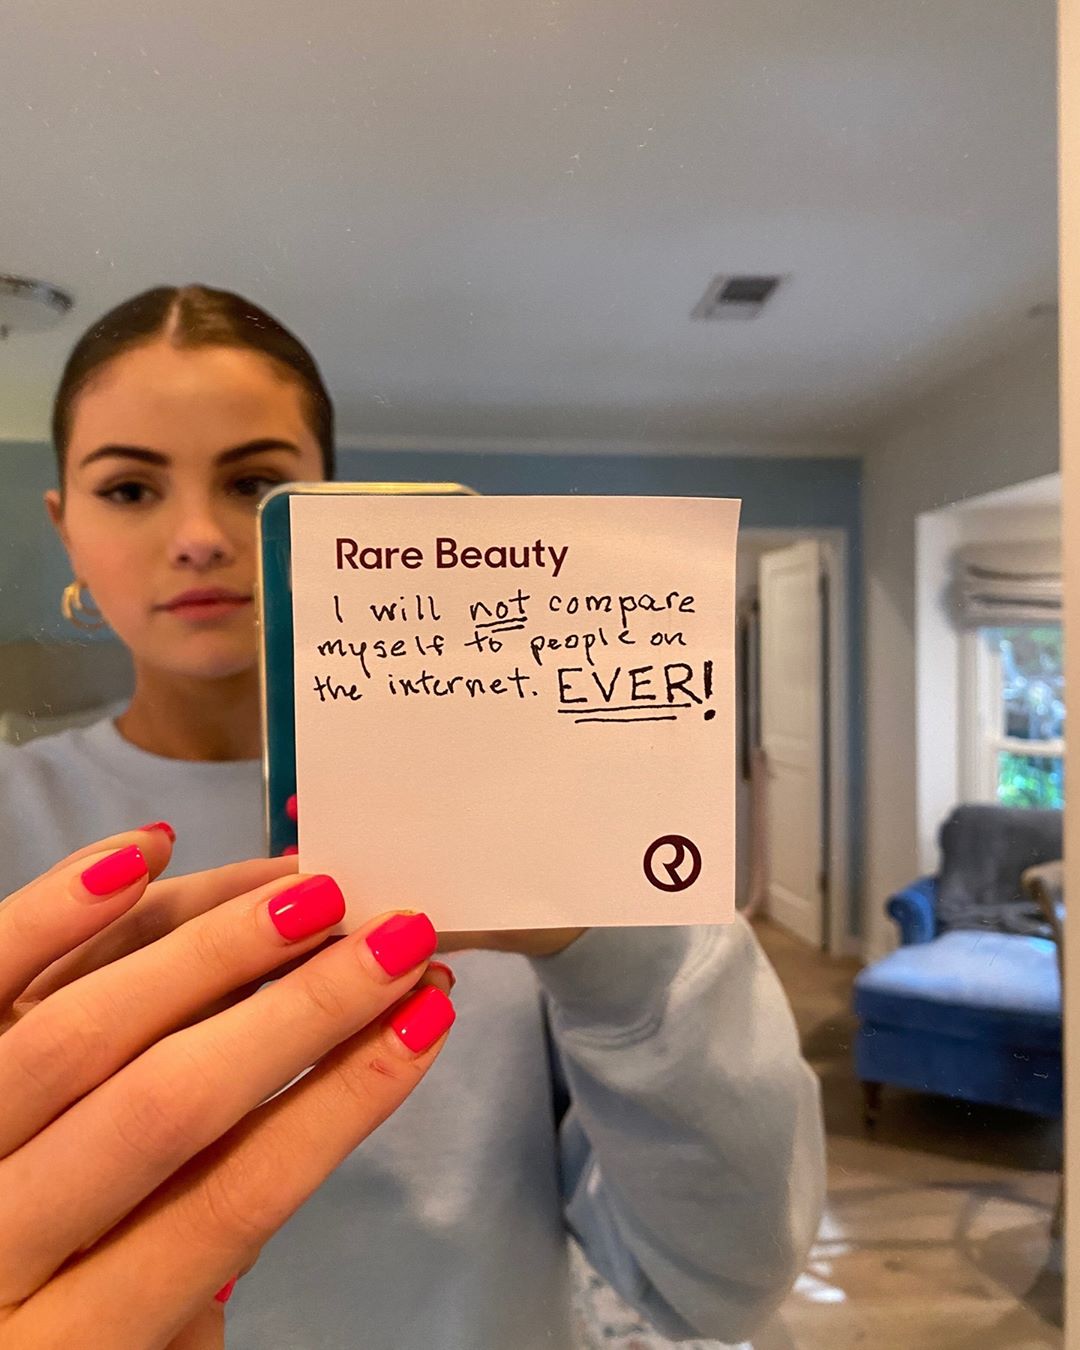 Sephora - Today is #WorldMentalHealthDay, and we are so proud to have a brand like @rarebeauty by @selenagomez represented at Sephora. Their mission to help end the stigma around mental health by supp...